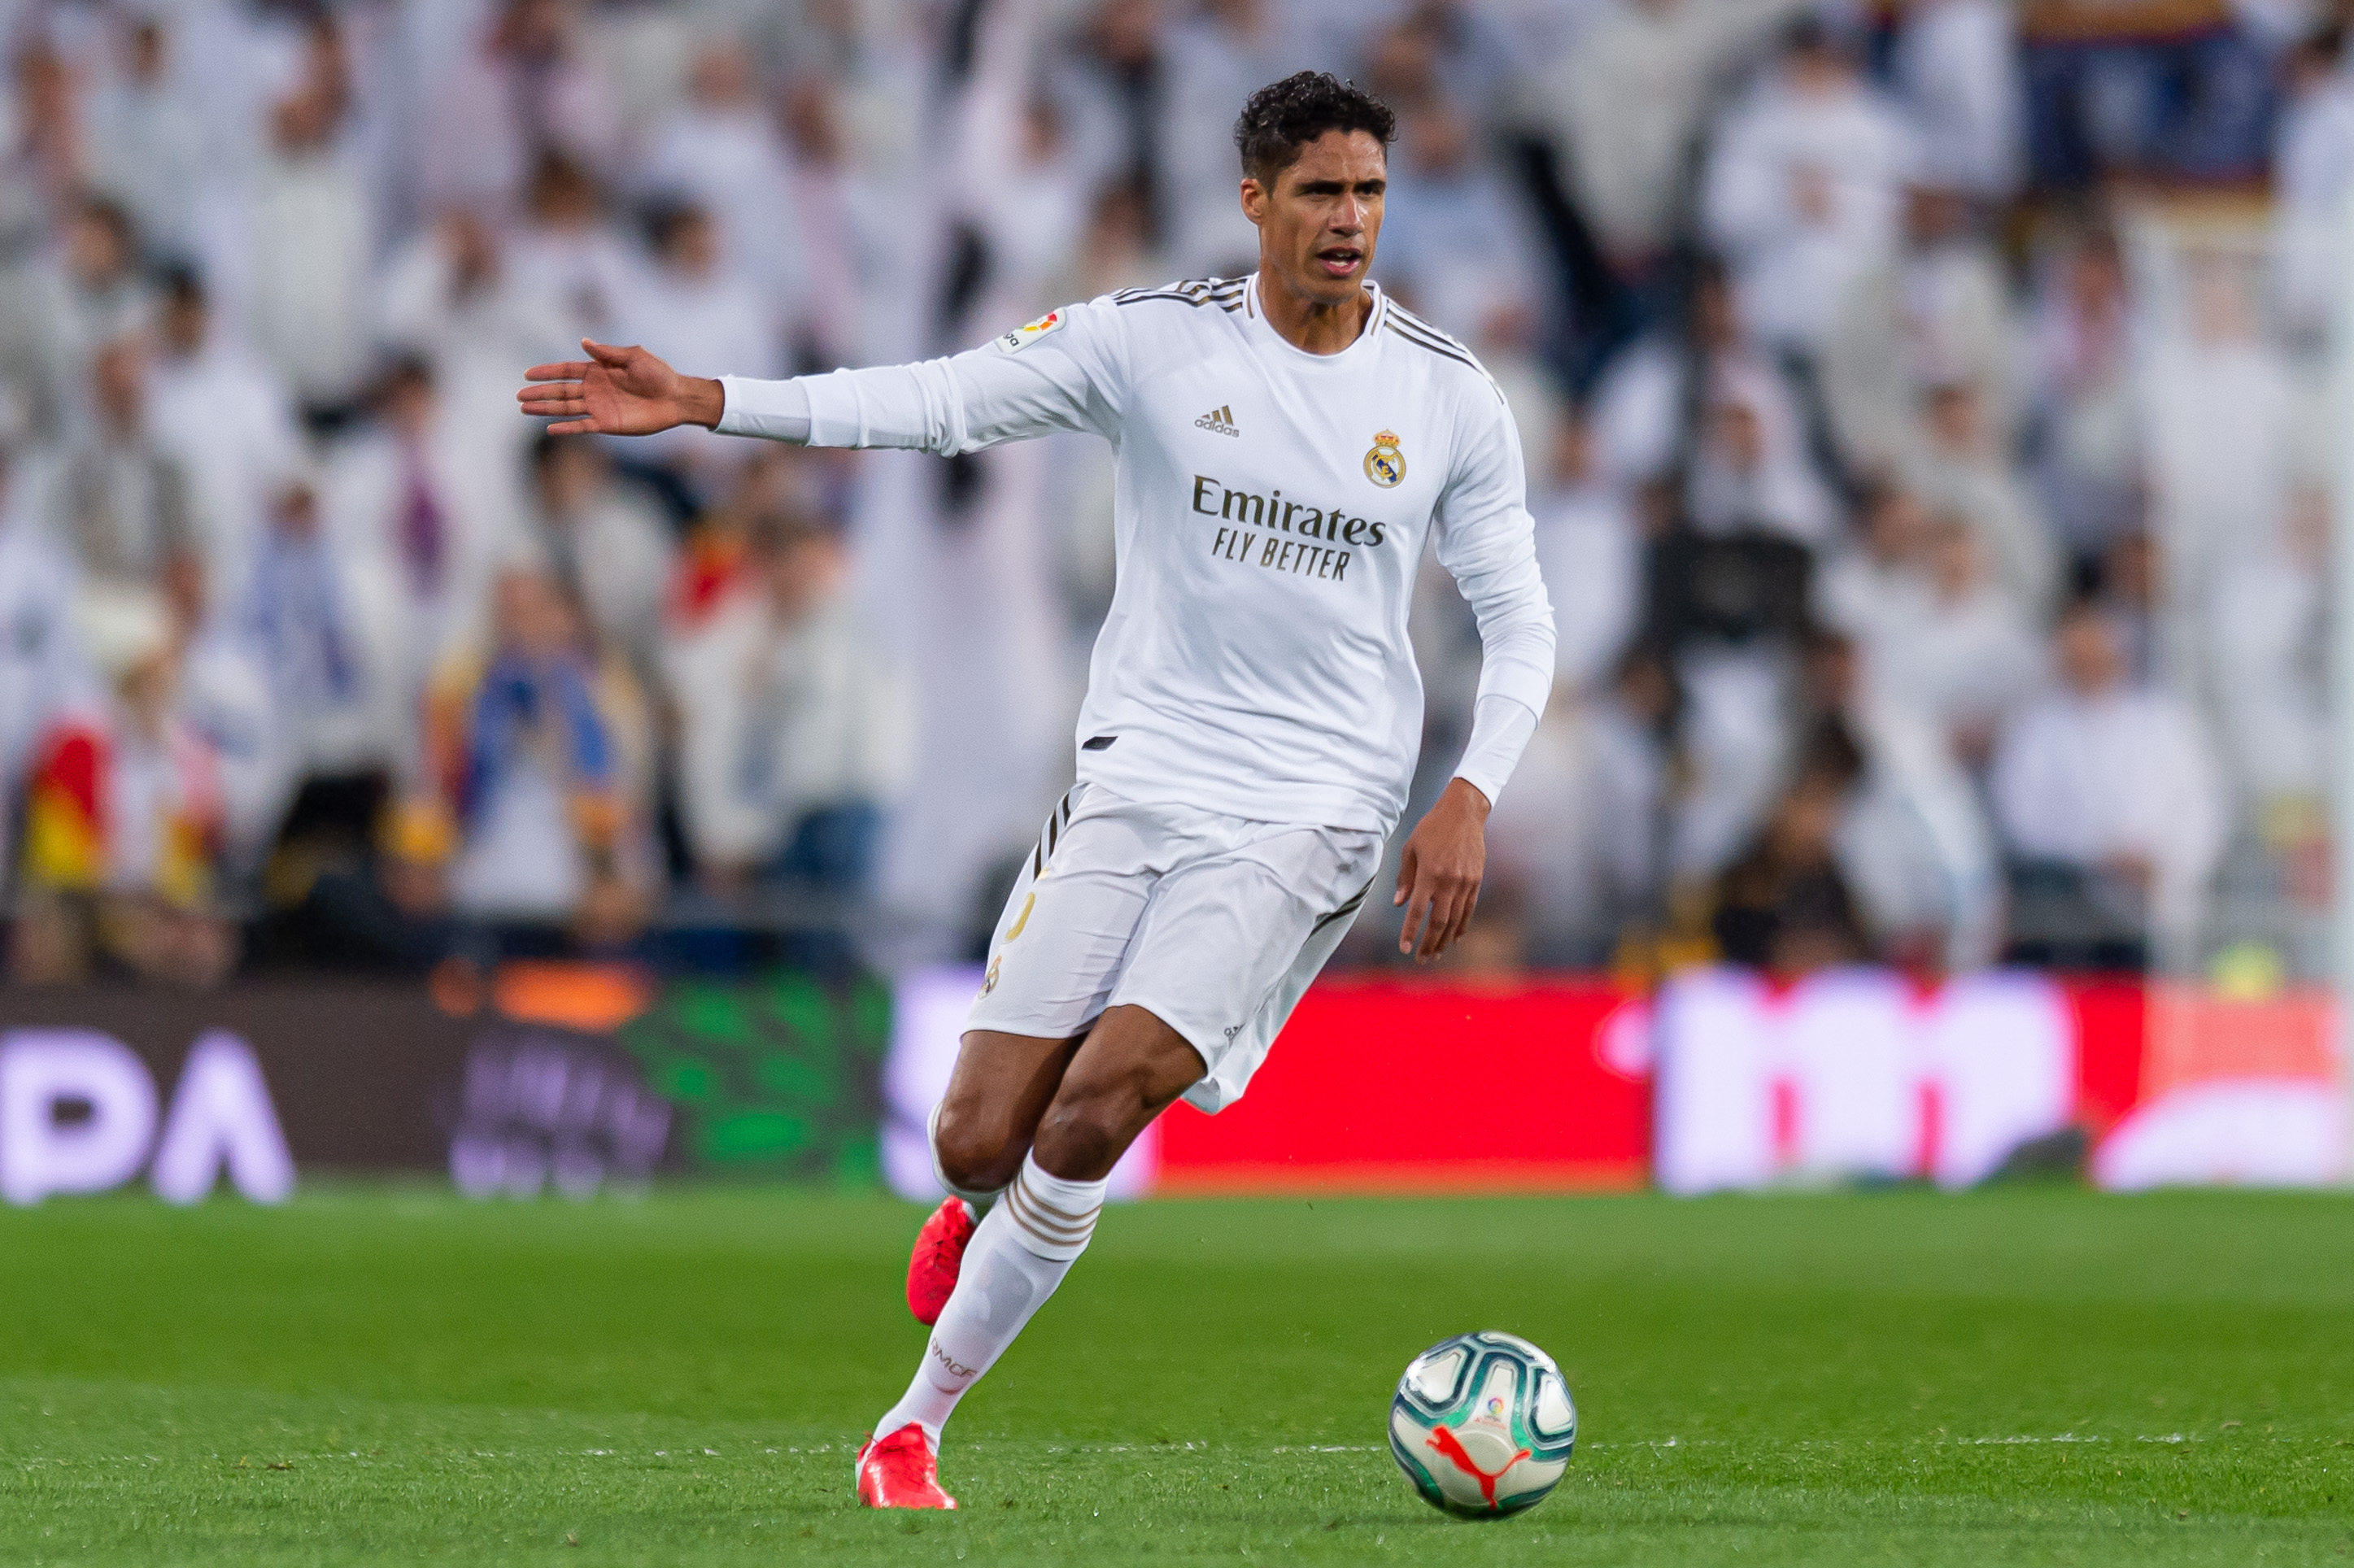 Raphael Varane on the ball for Real Madrid against Barcelona in March 2020.